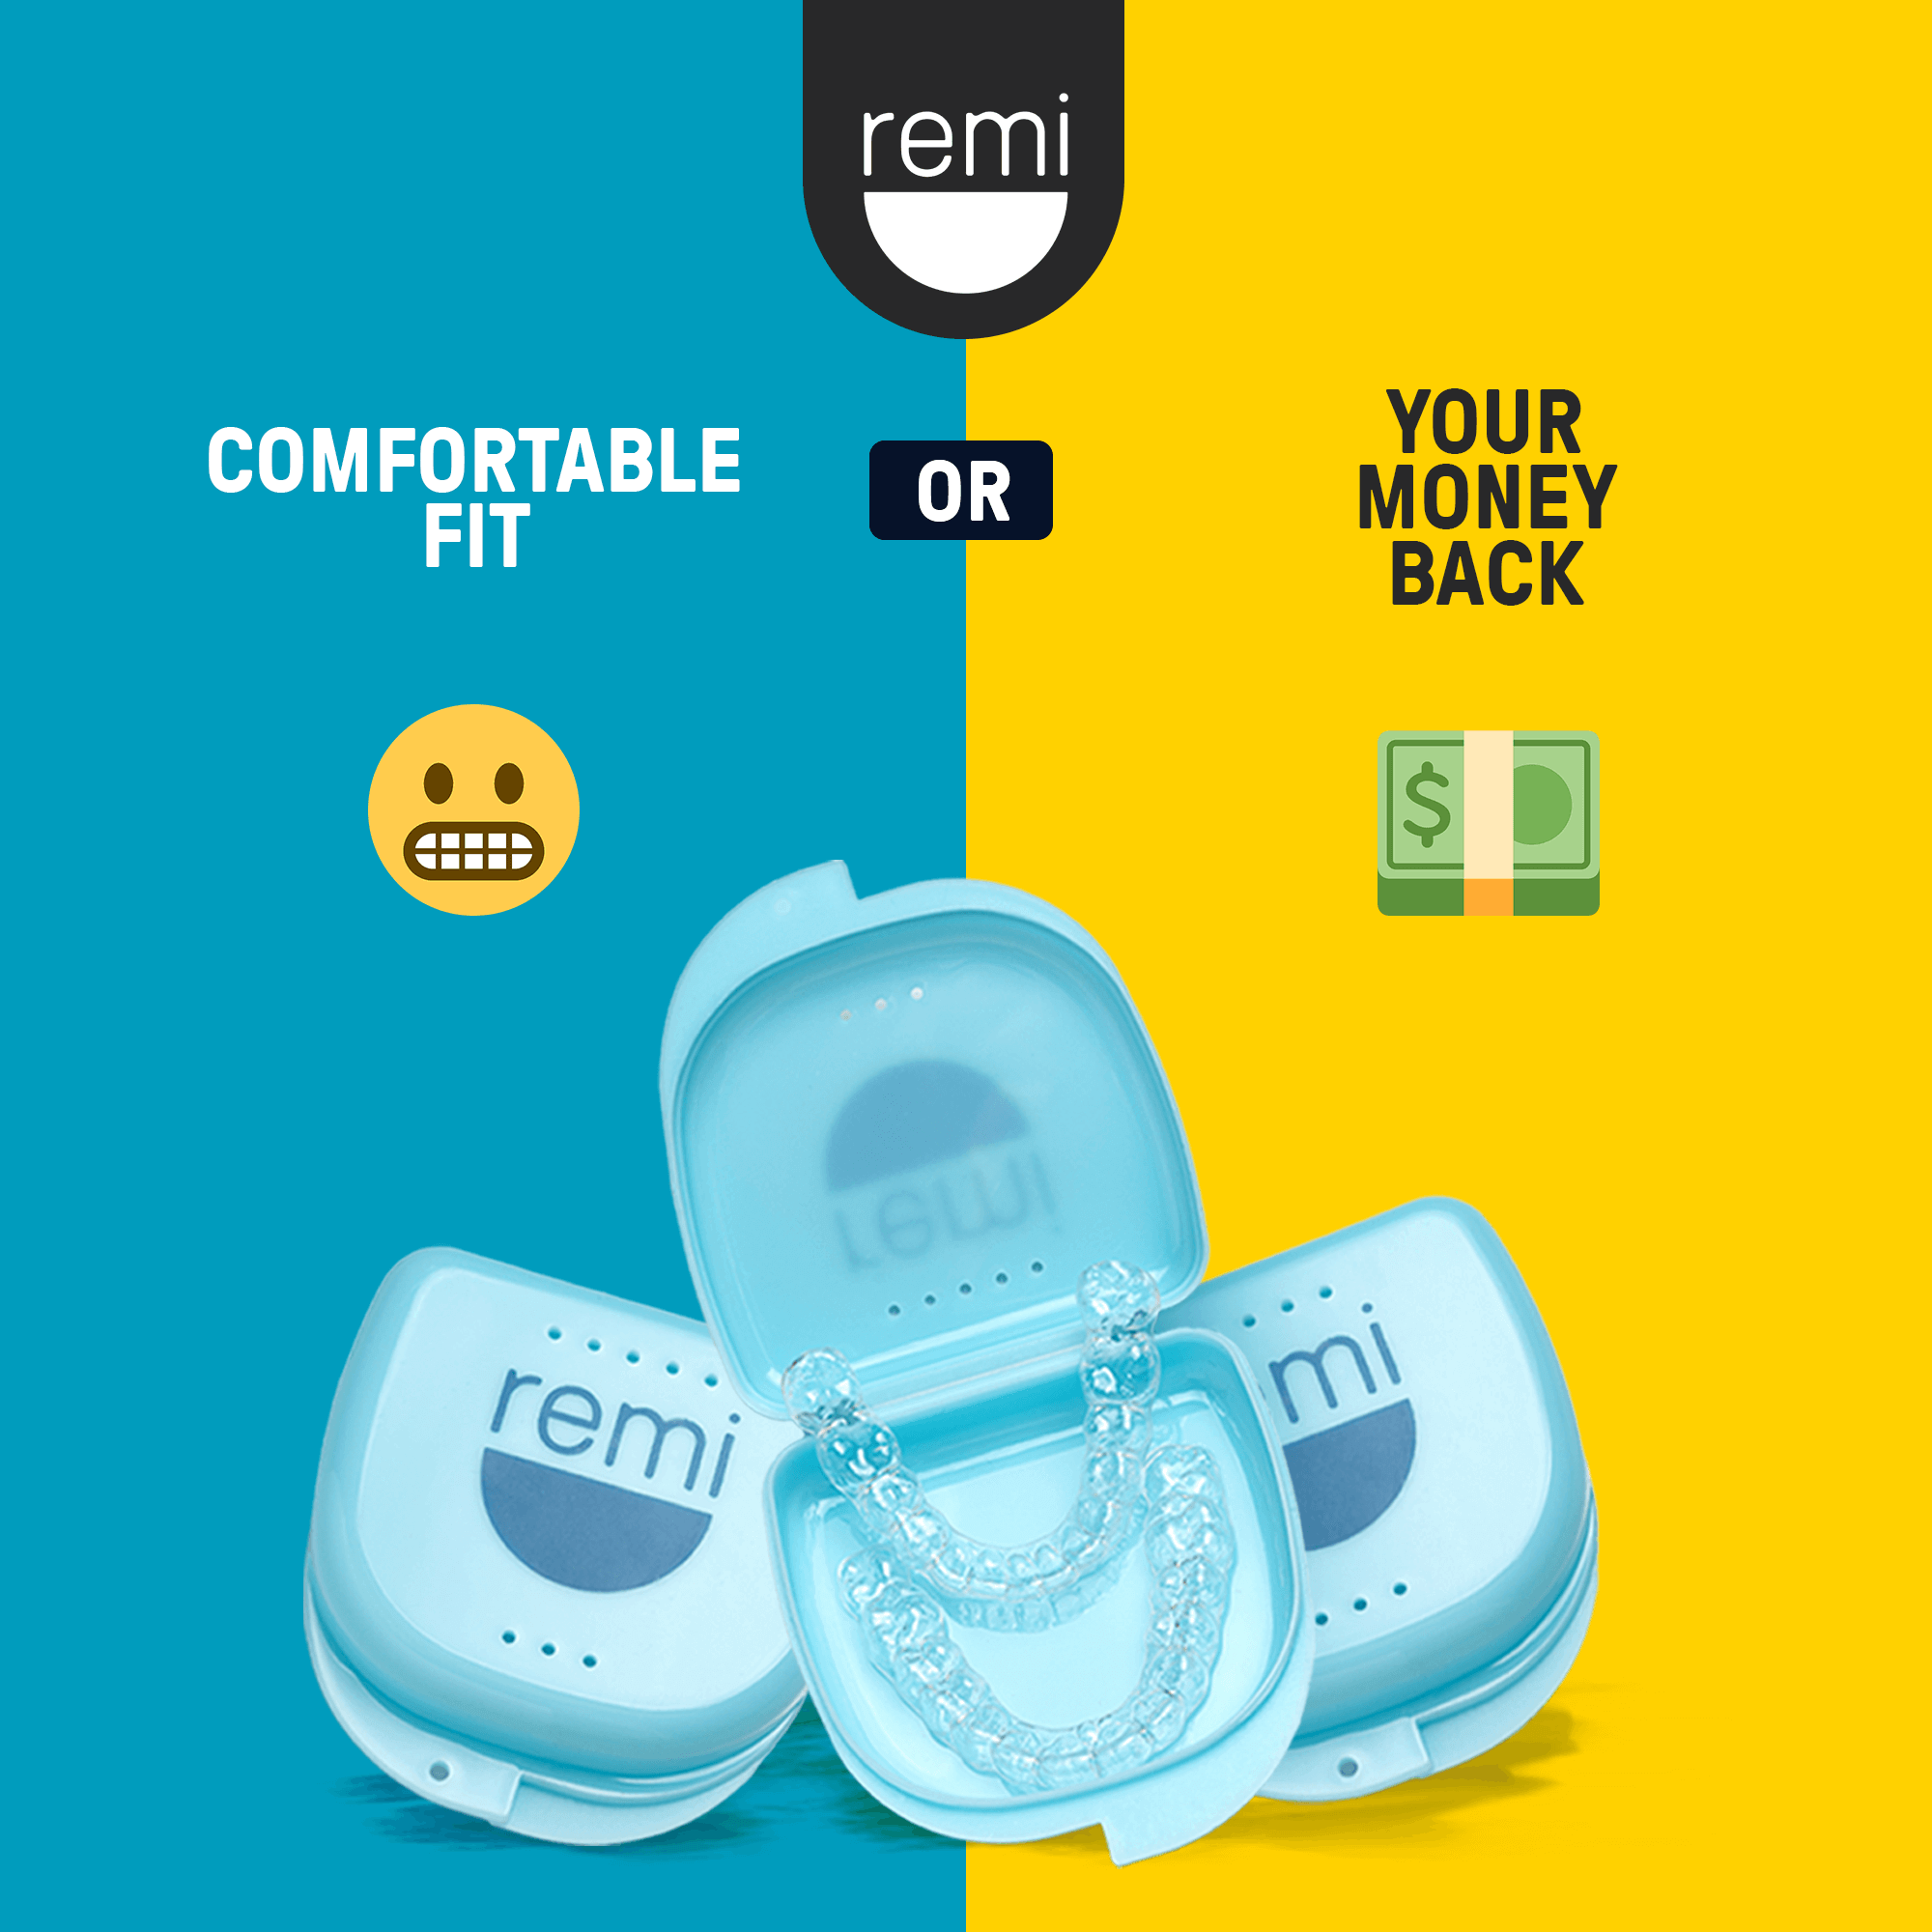 A blue case containing clear dental trays, designed as Custom Night Guards to alleviate jaw pain, set against a split background with text: "Comfortable Fit" on the left and "Your Money Back" on the right.